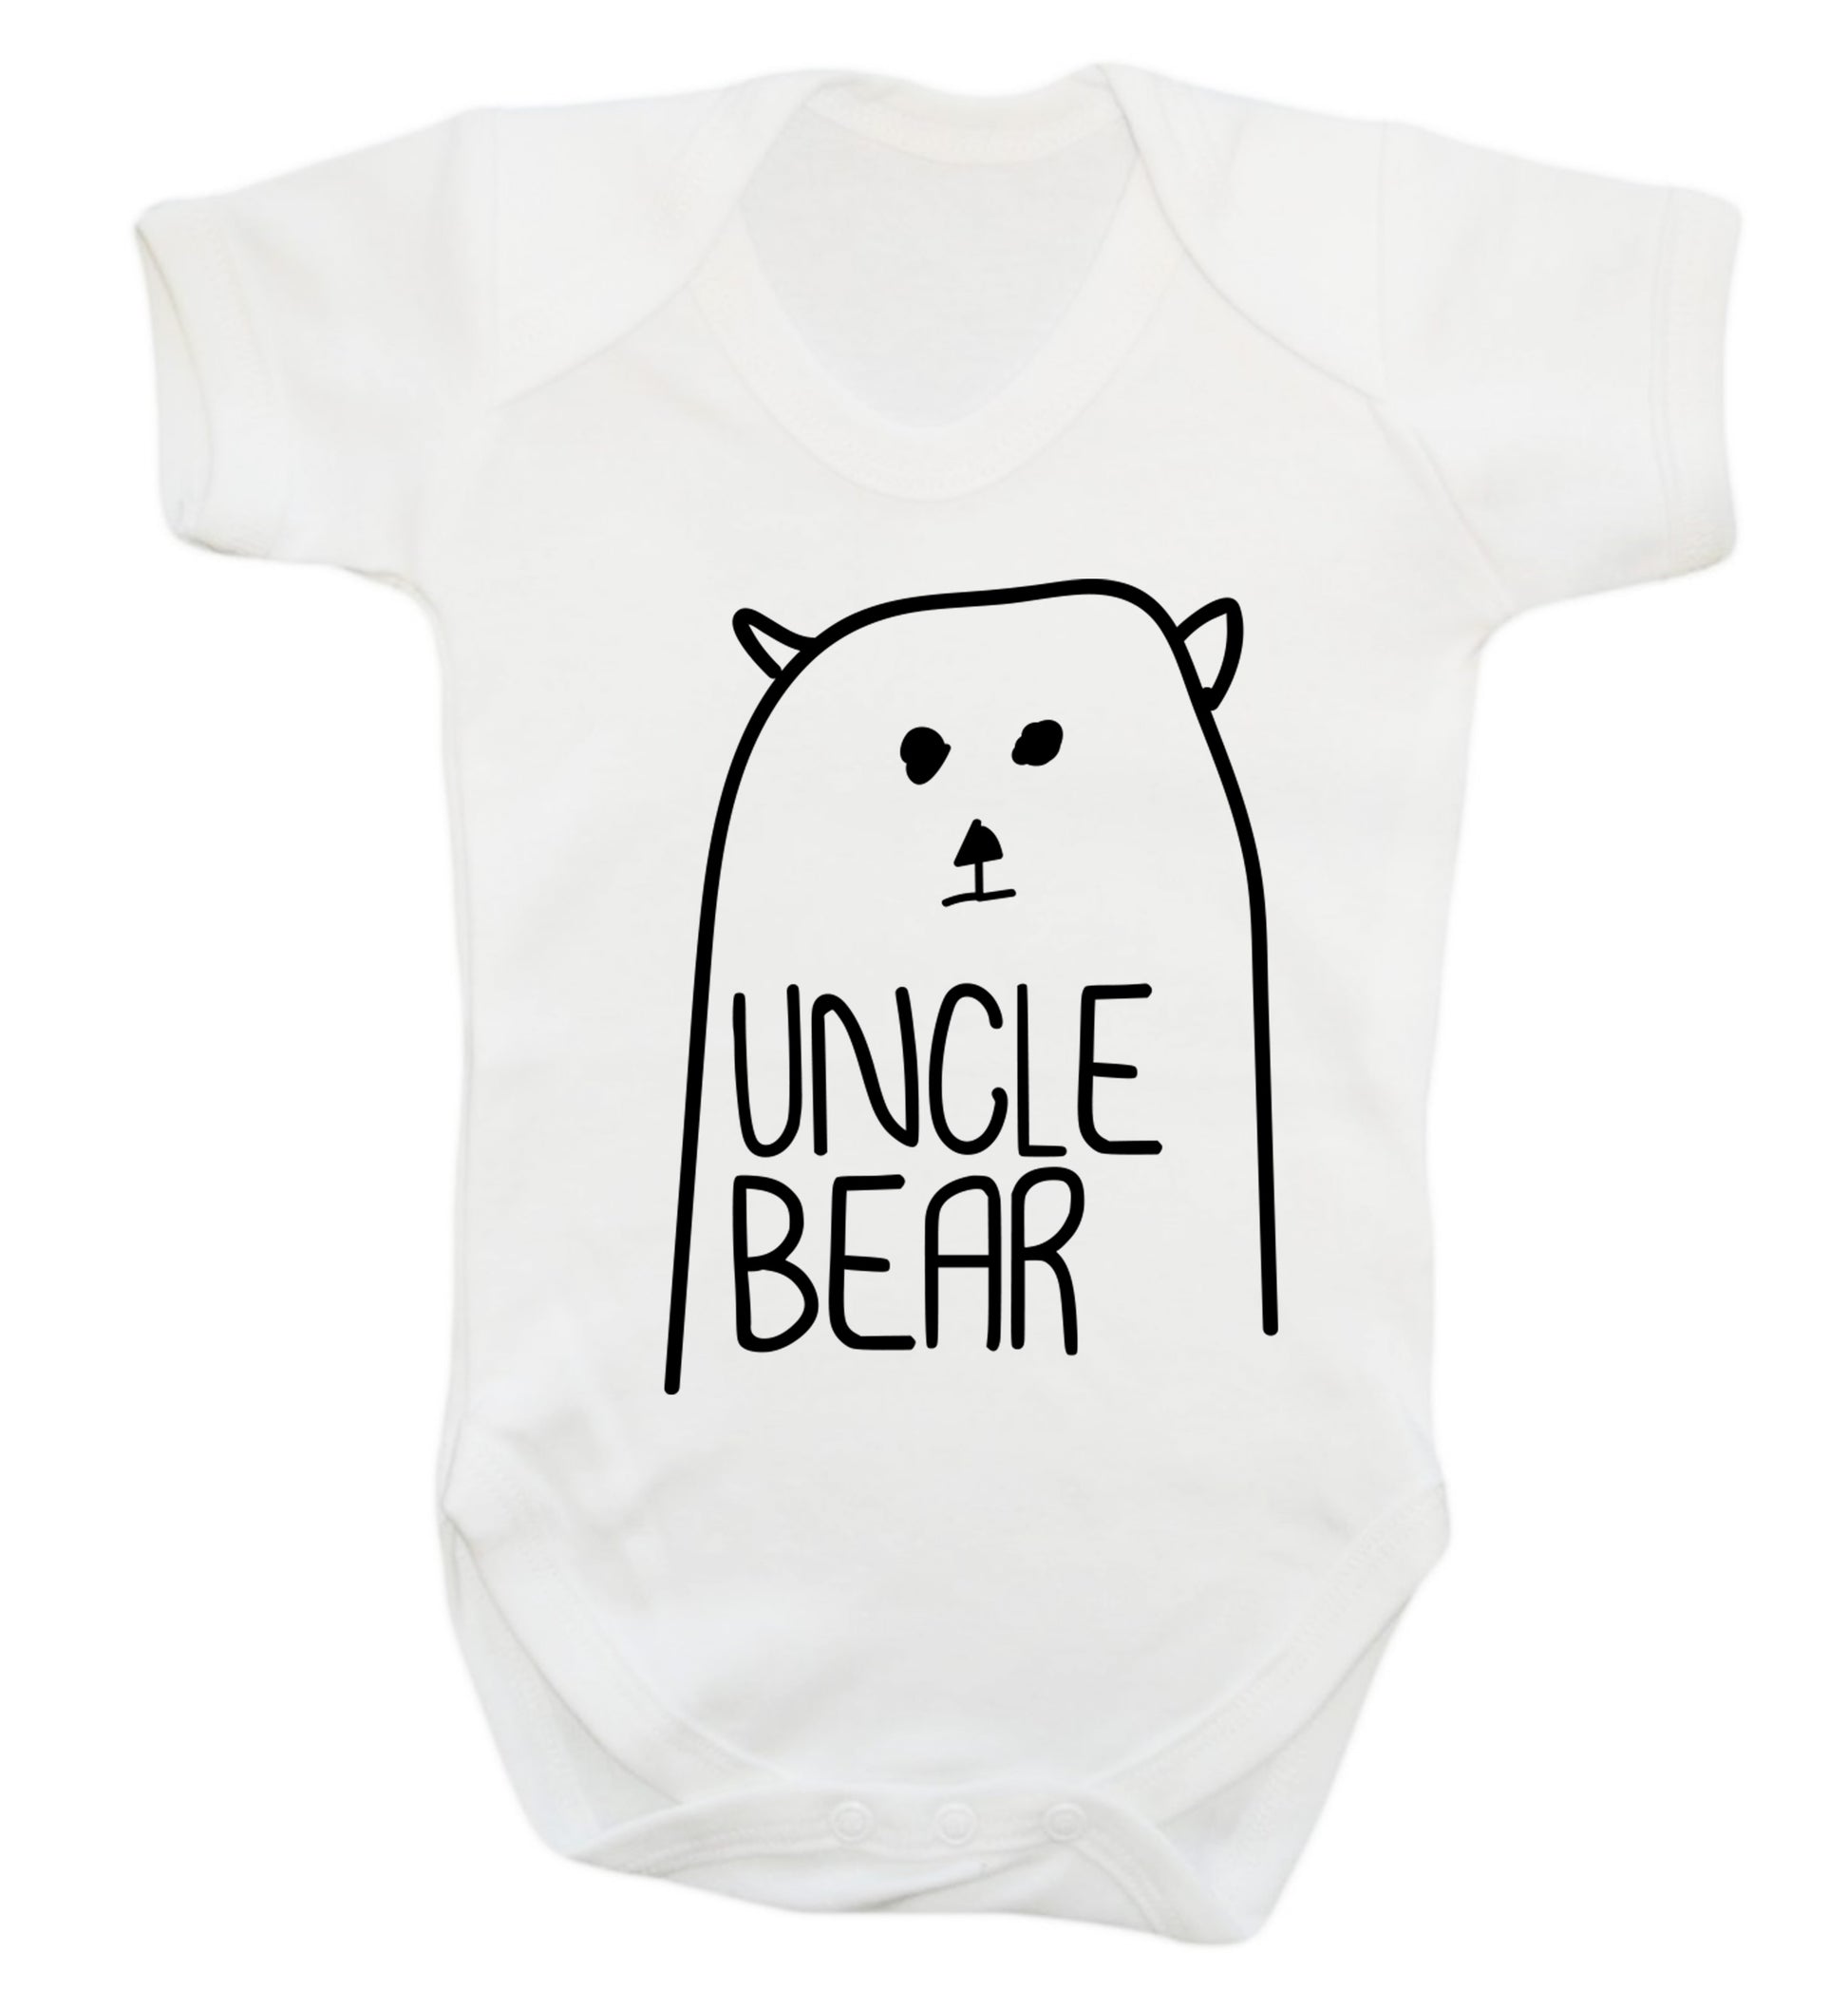 Uncle bear Baby Vest white 18-24 months